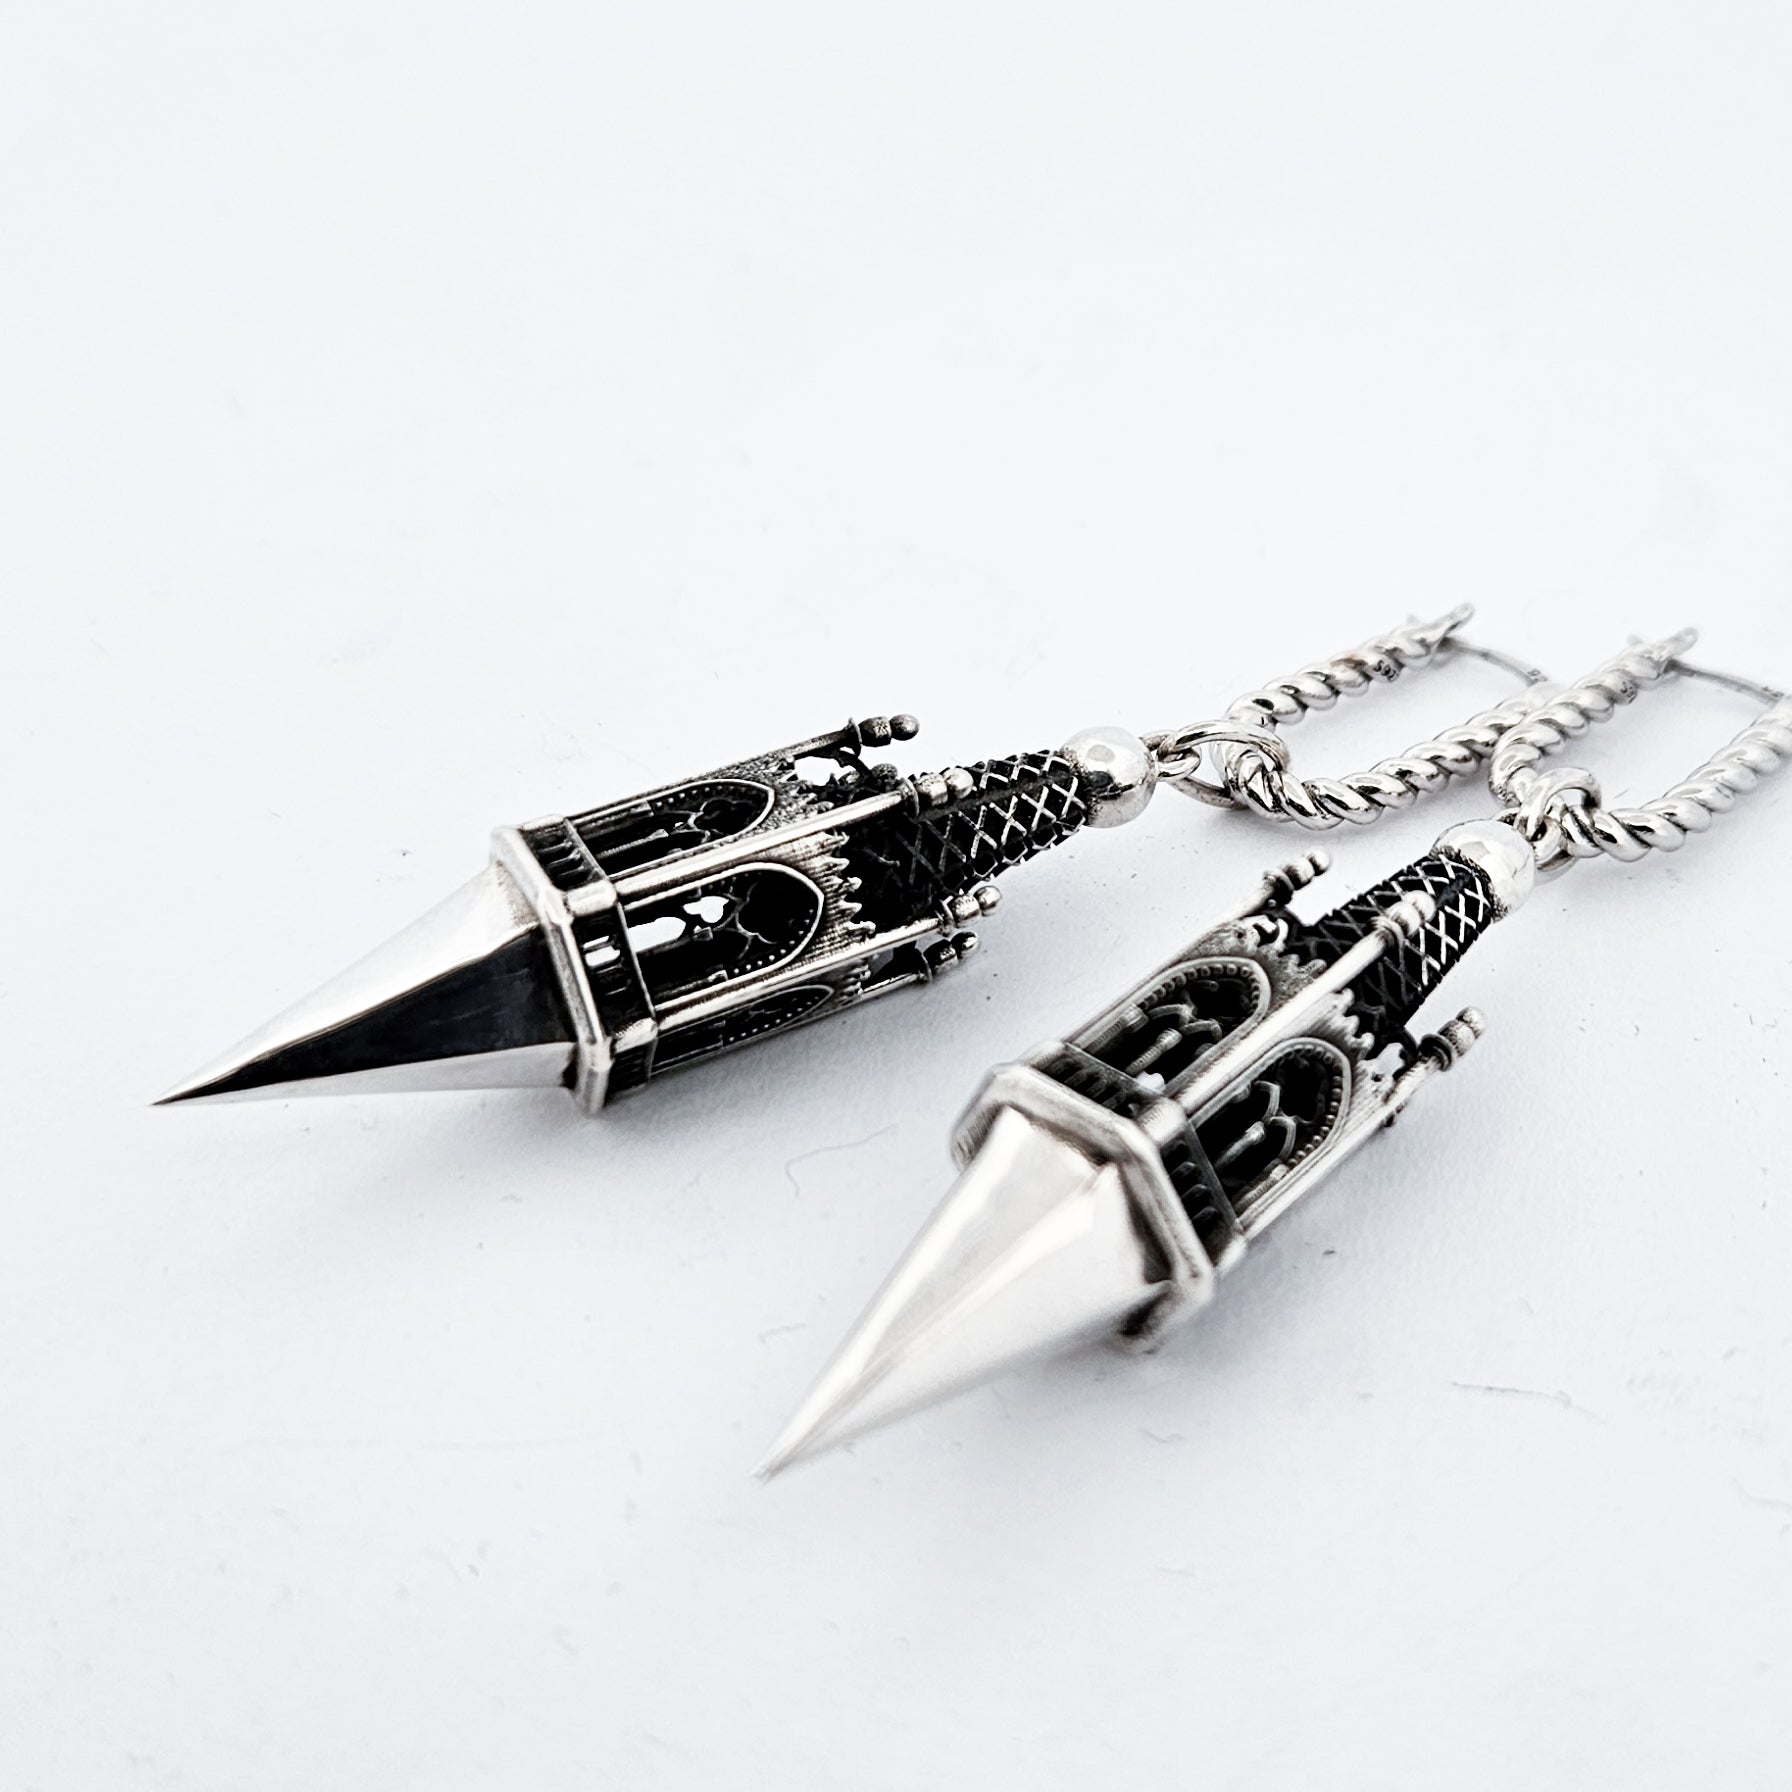 Gothic Tower Pyramid Dangling Earrings